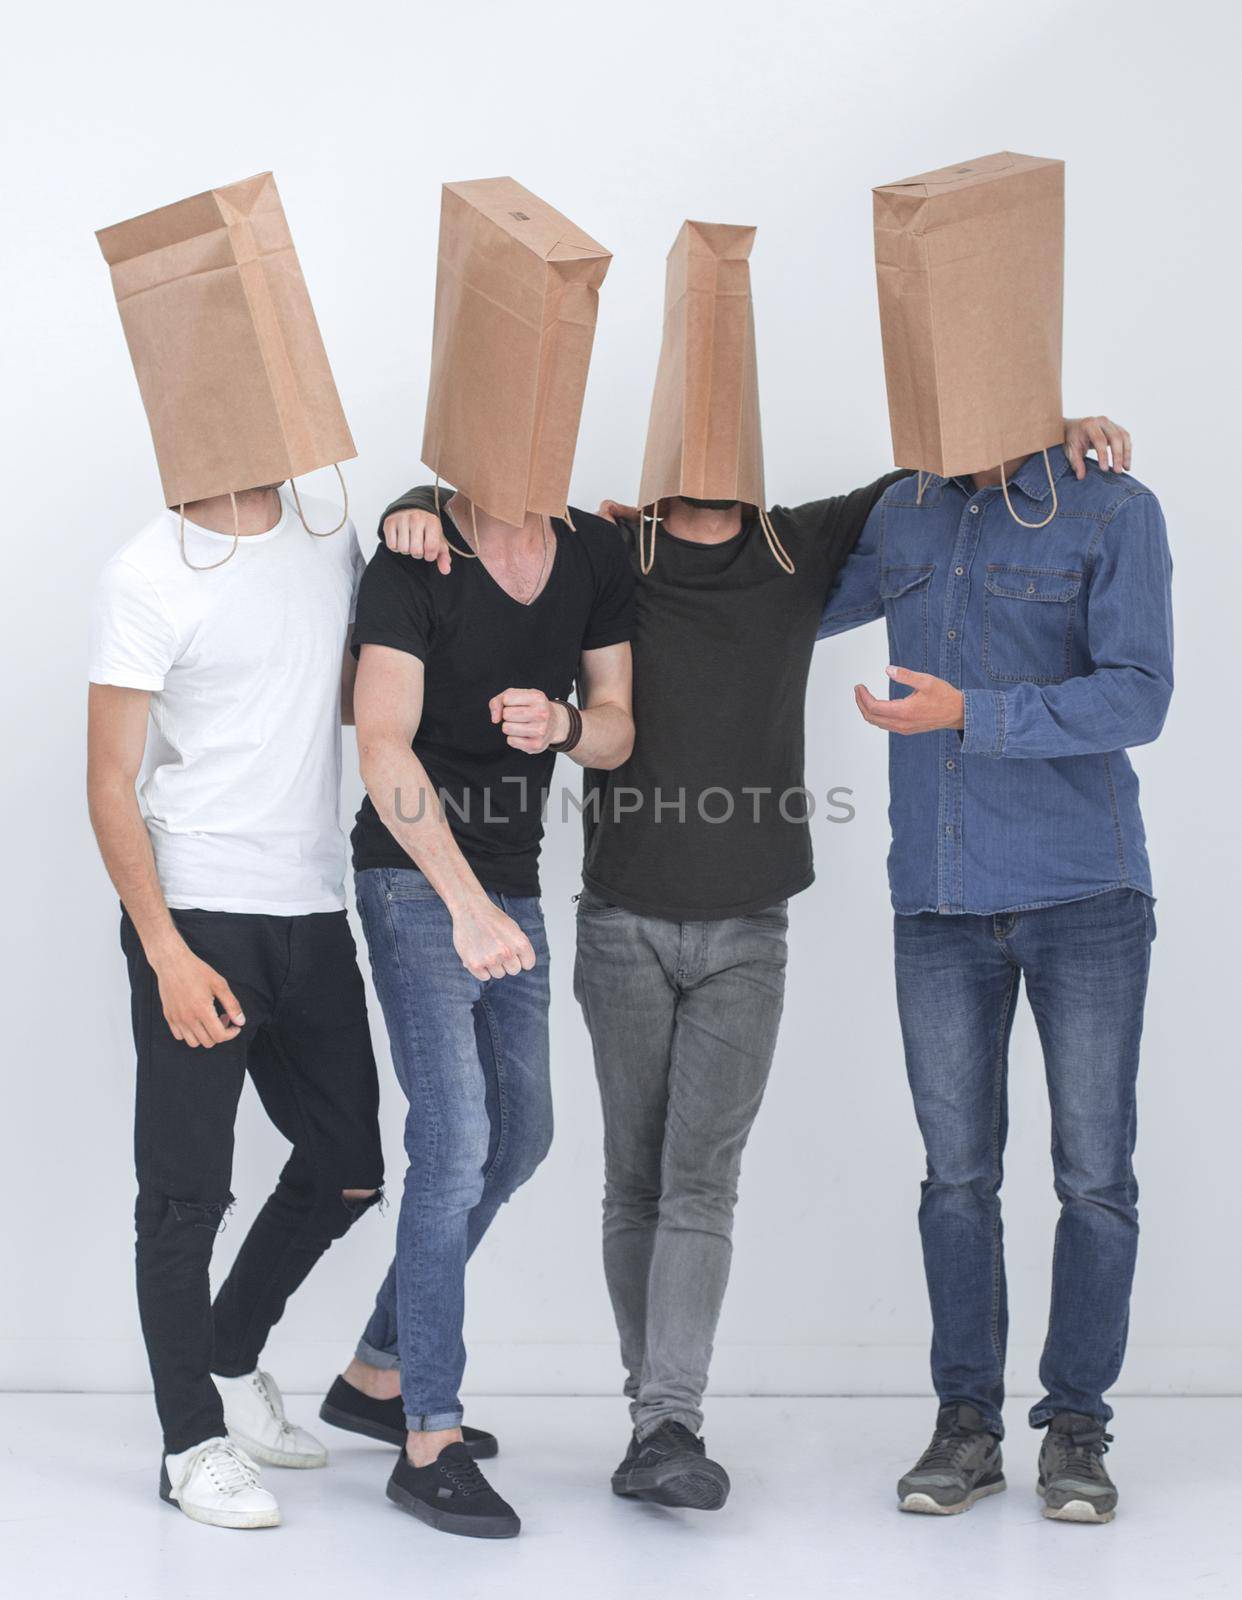 in full growth. a group of men with paper bags on their heads.photo with copy space